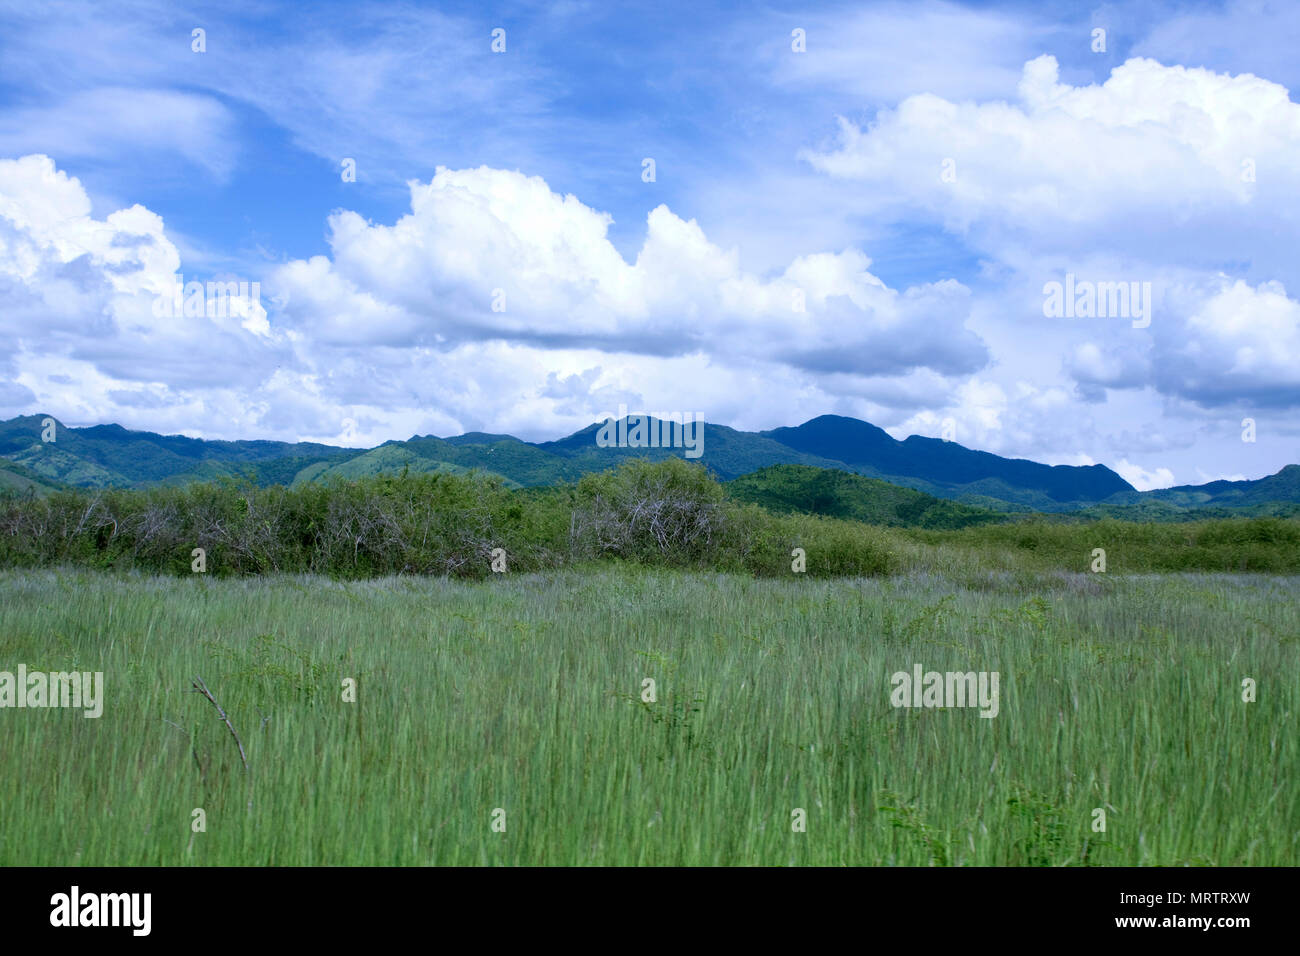 Beautiful view of thick clouds flowing over green field and distant hills in outskirts of Trinidad, Cuba. Stock Photo